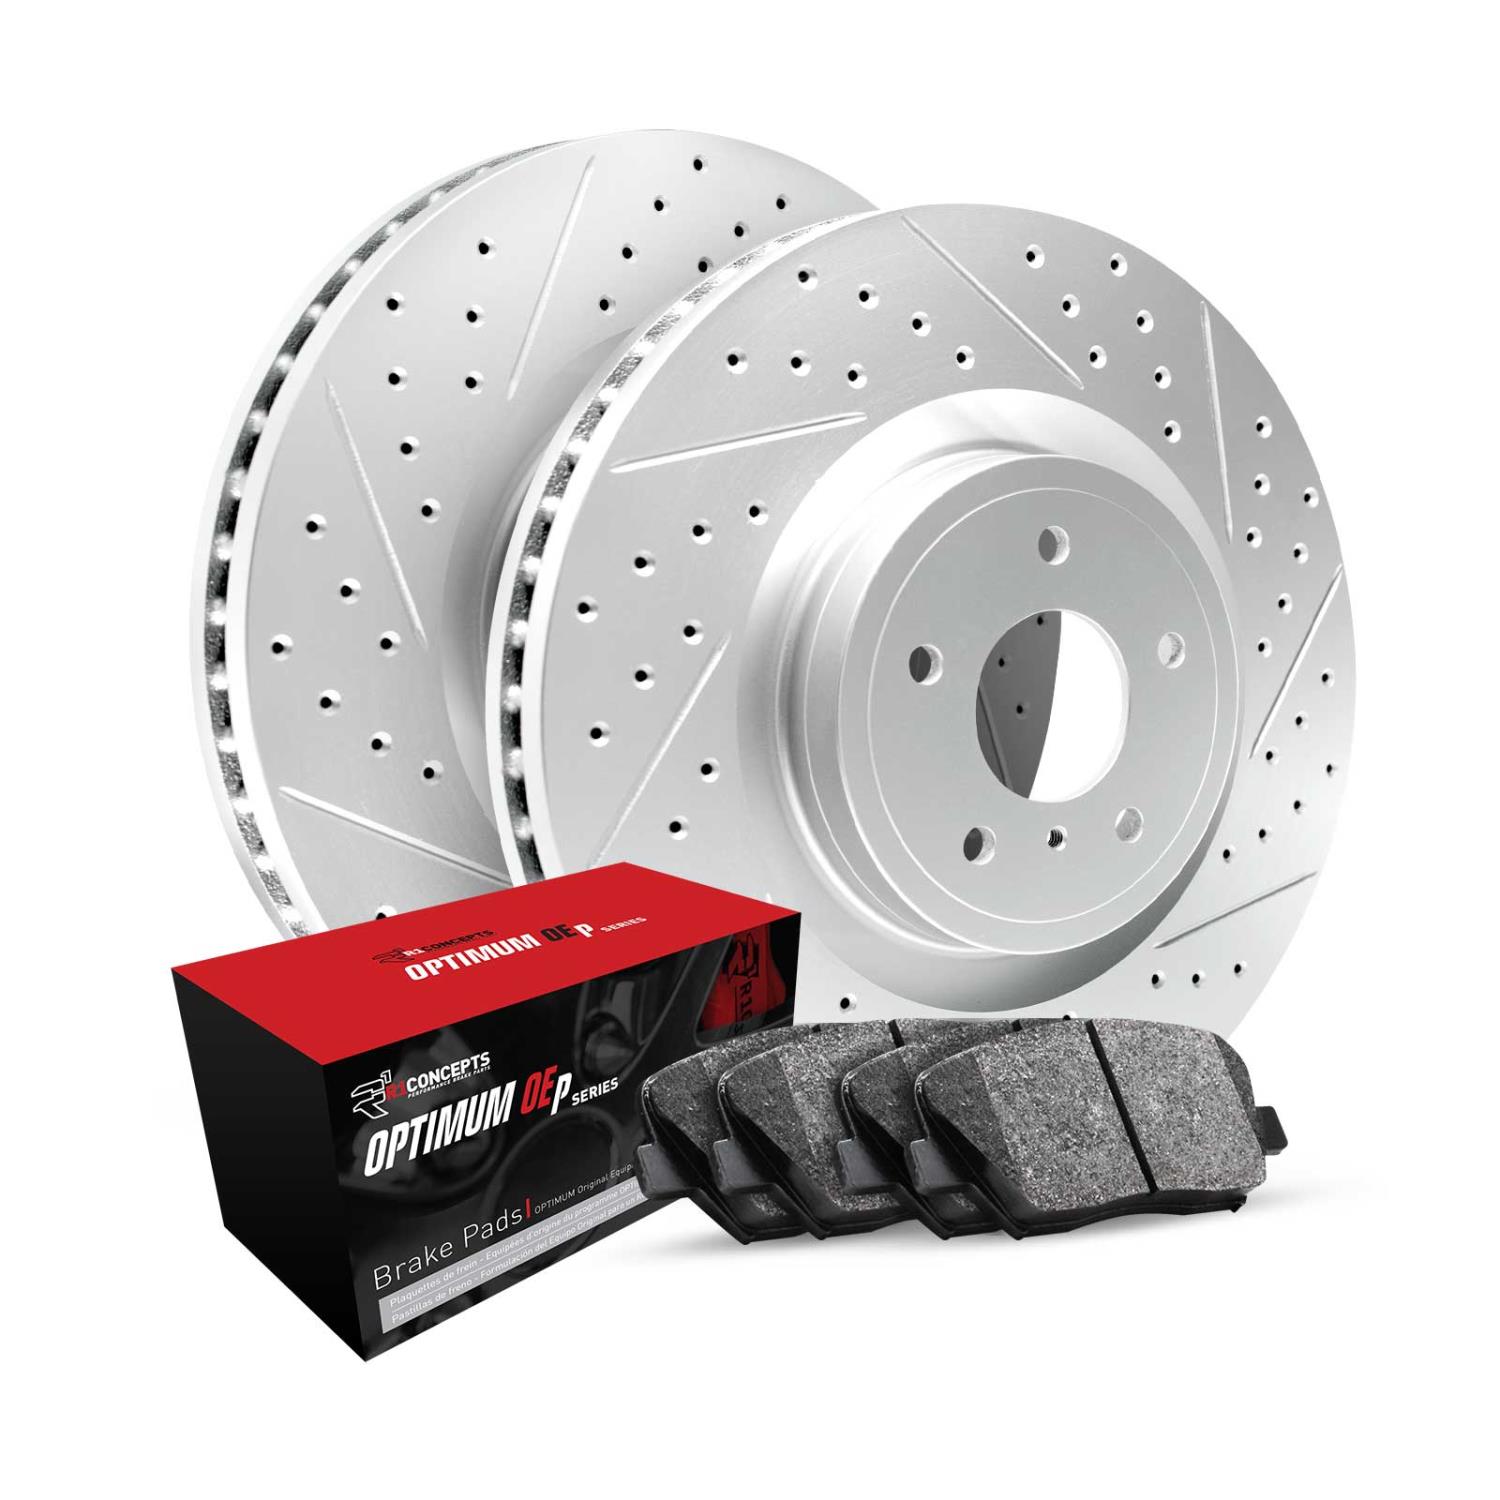 GEO-Carbon Drilled & Slotted Brake Rotor Set w/Optimum OE Pads, 2005-2010 Fits Multiple Makes/Models, Position: Rear